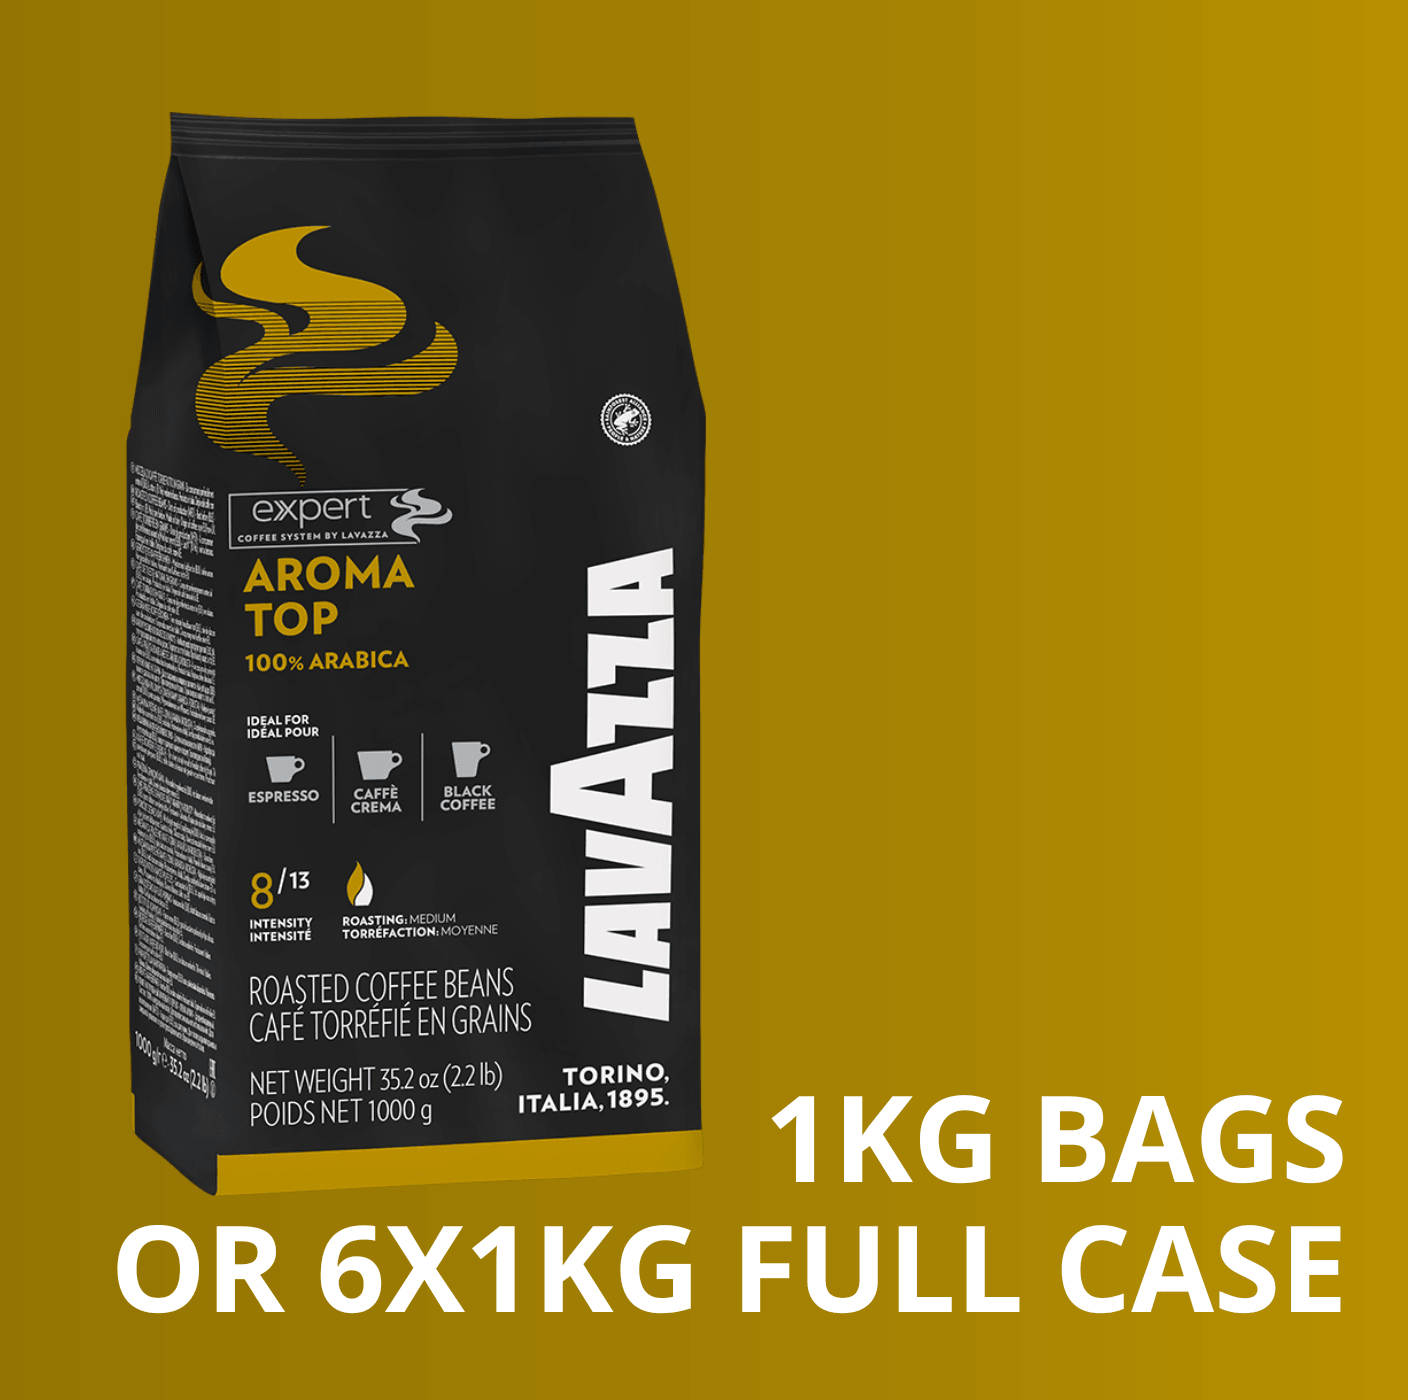 Lavazza Expert Aroma Top Coffee Beans (1kg Bags or Full Case) Rainforest Alliance Certified - Vending Superstore